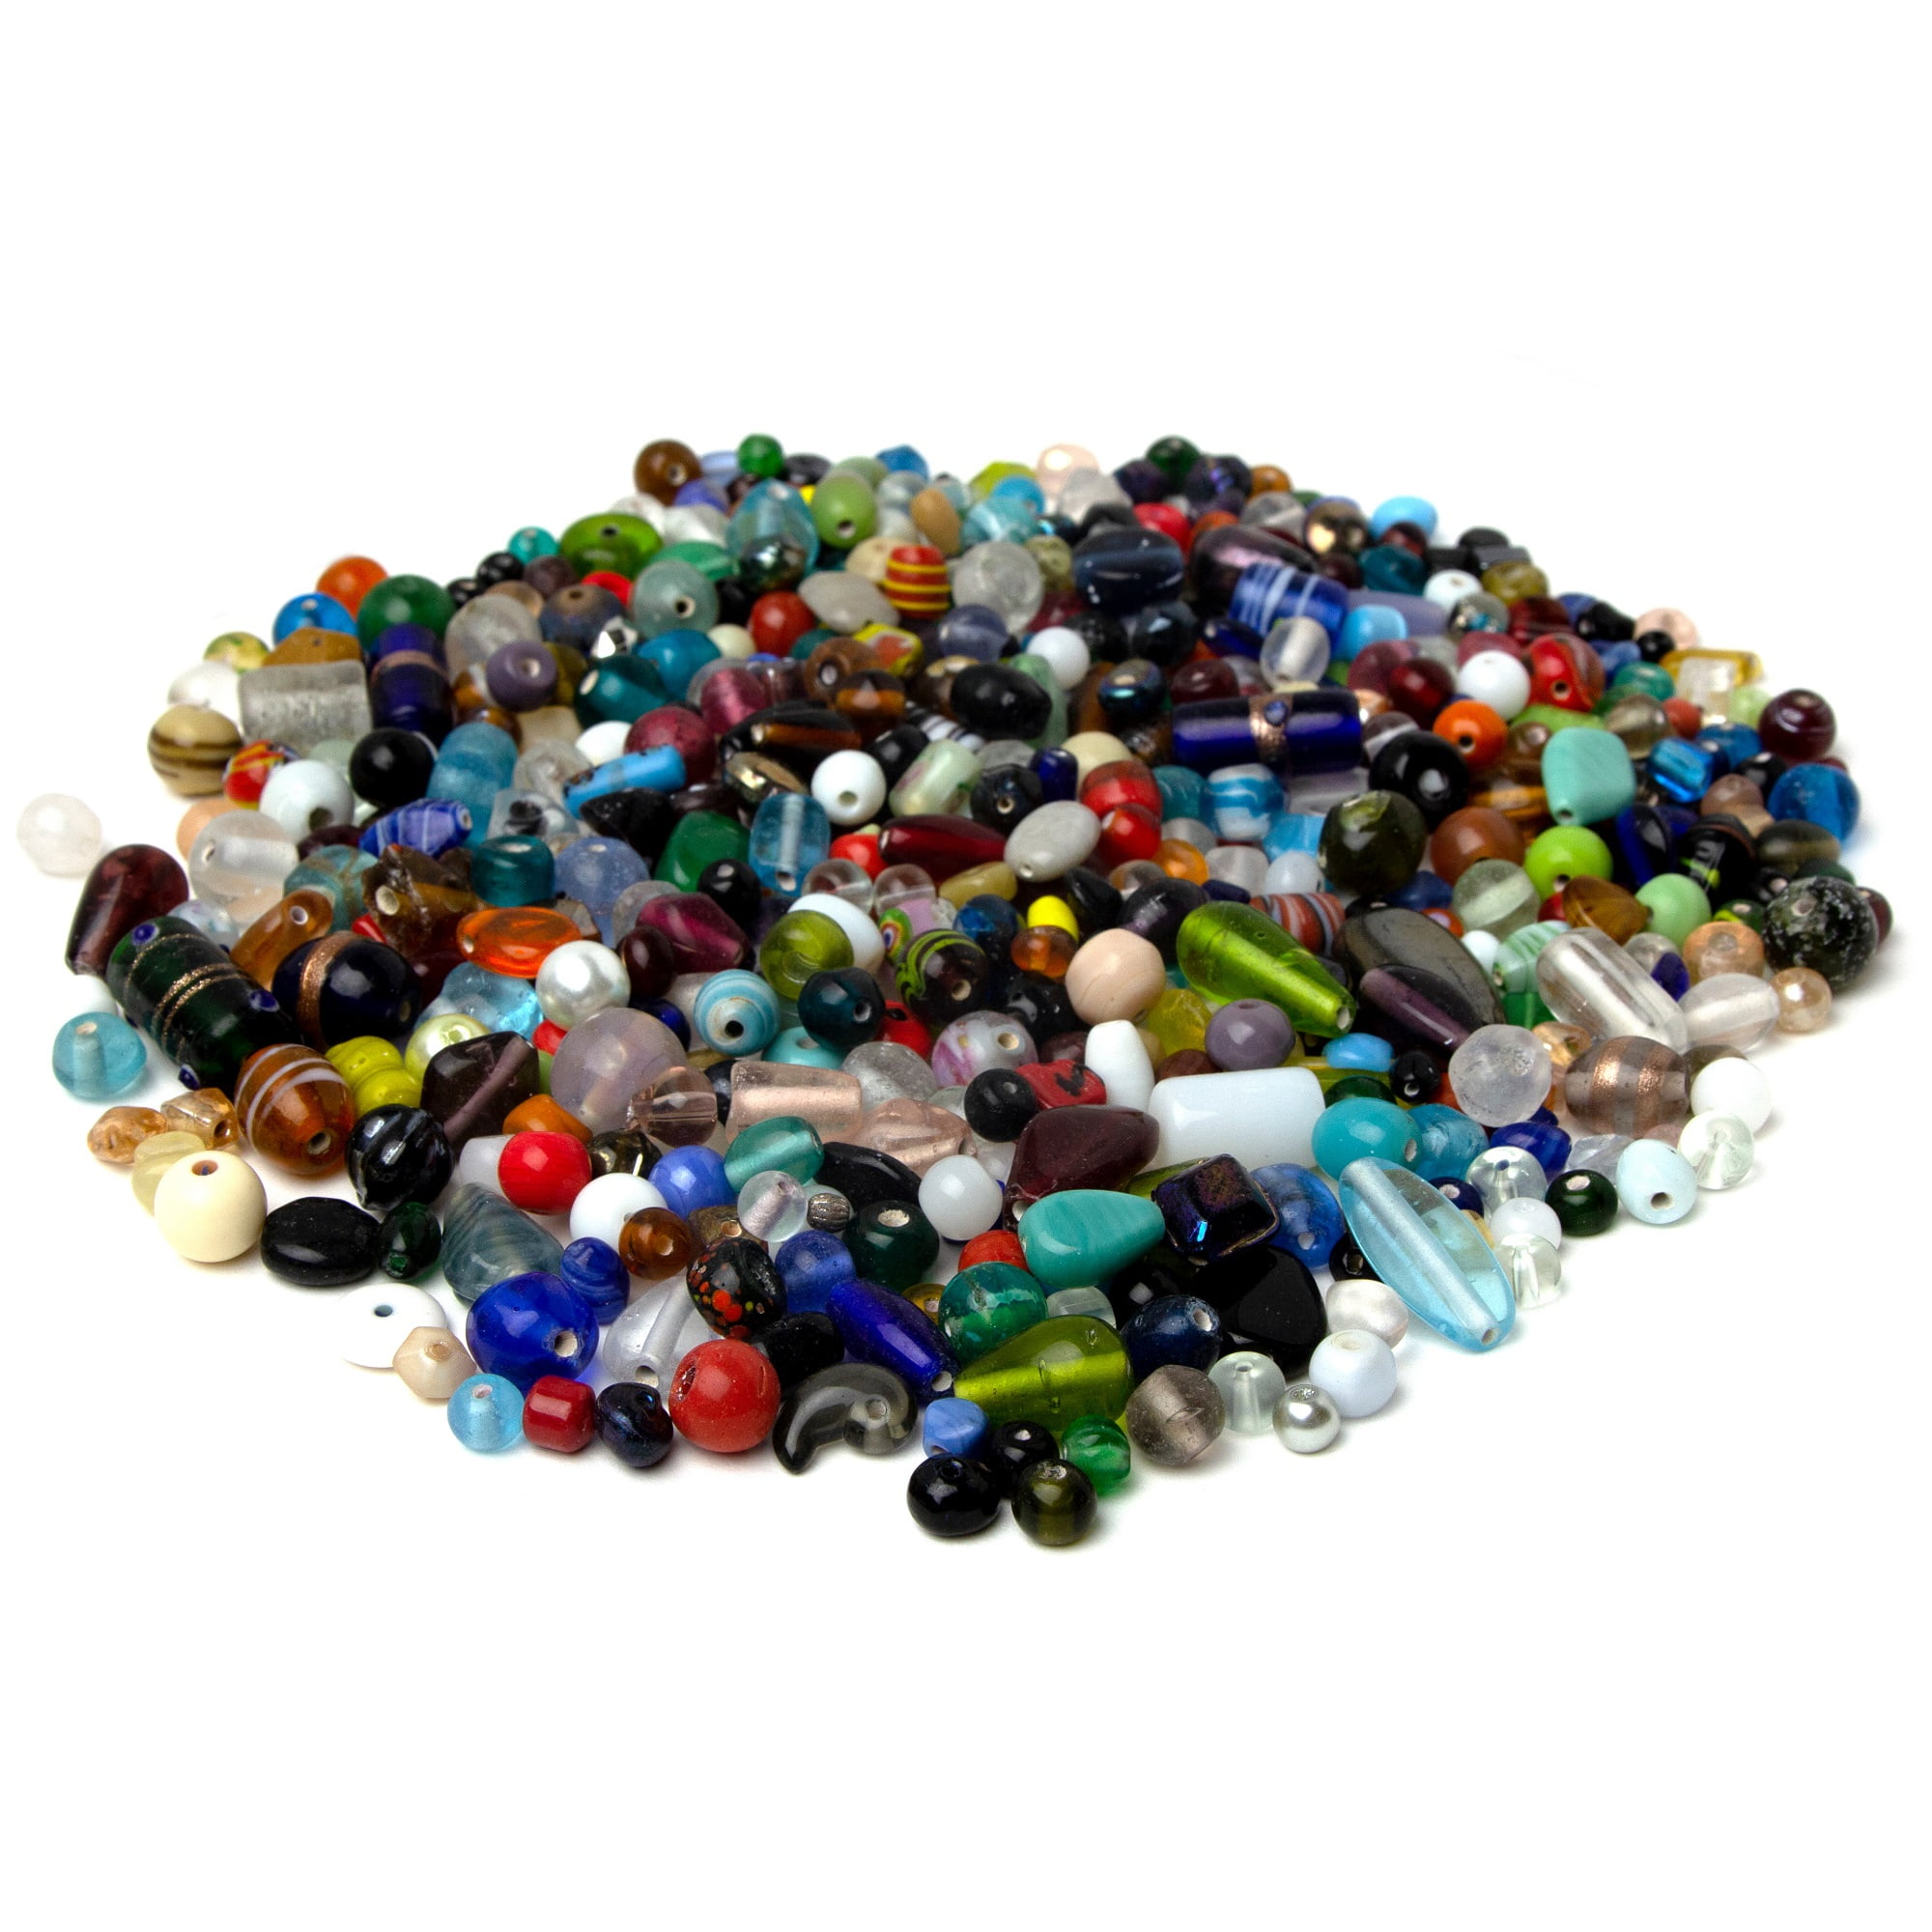 Cousin DIY Mega Tub Glass Seed Beads Jewelry Making Kit, Multi-Colored,  500g Beads, Unisex, 25,000+ Pieces